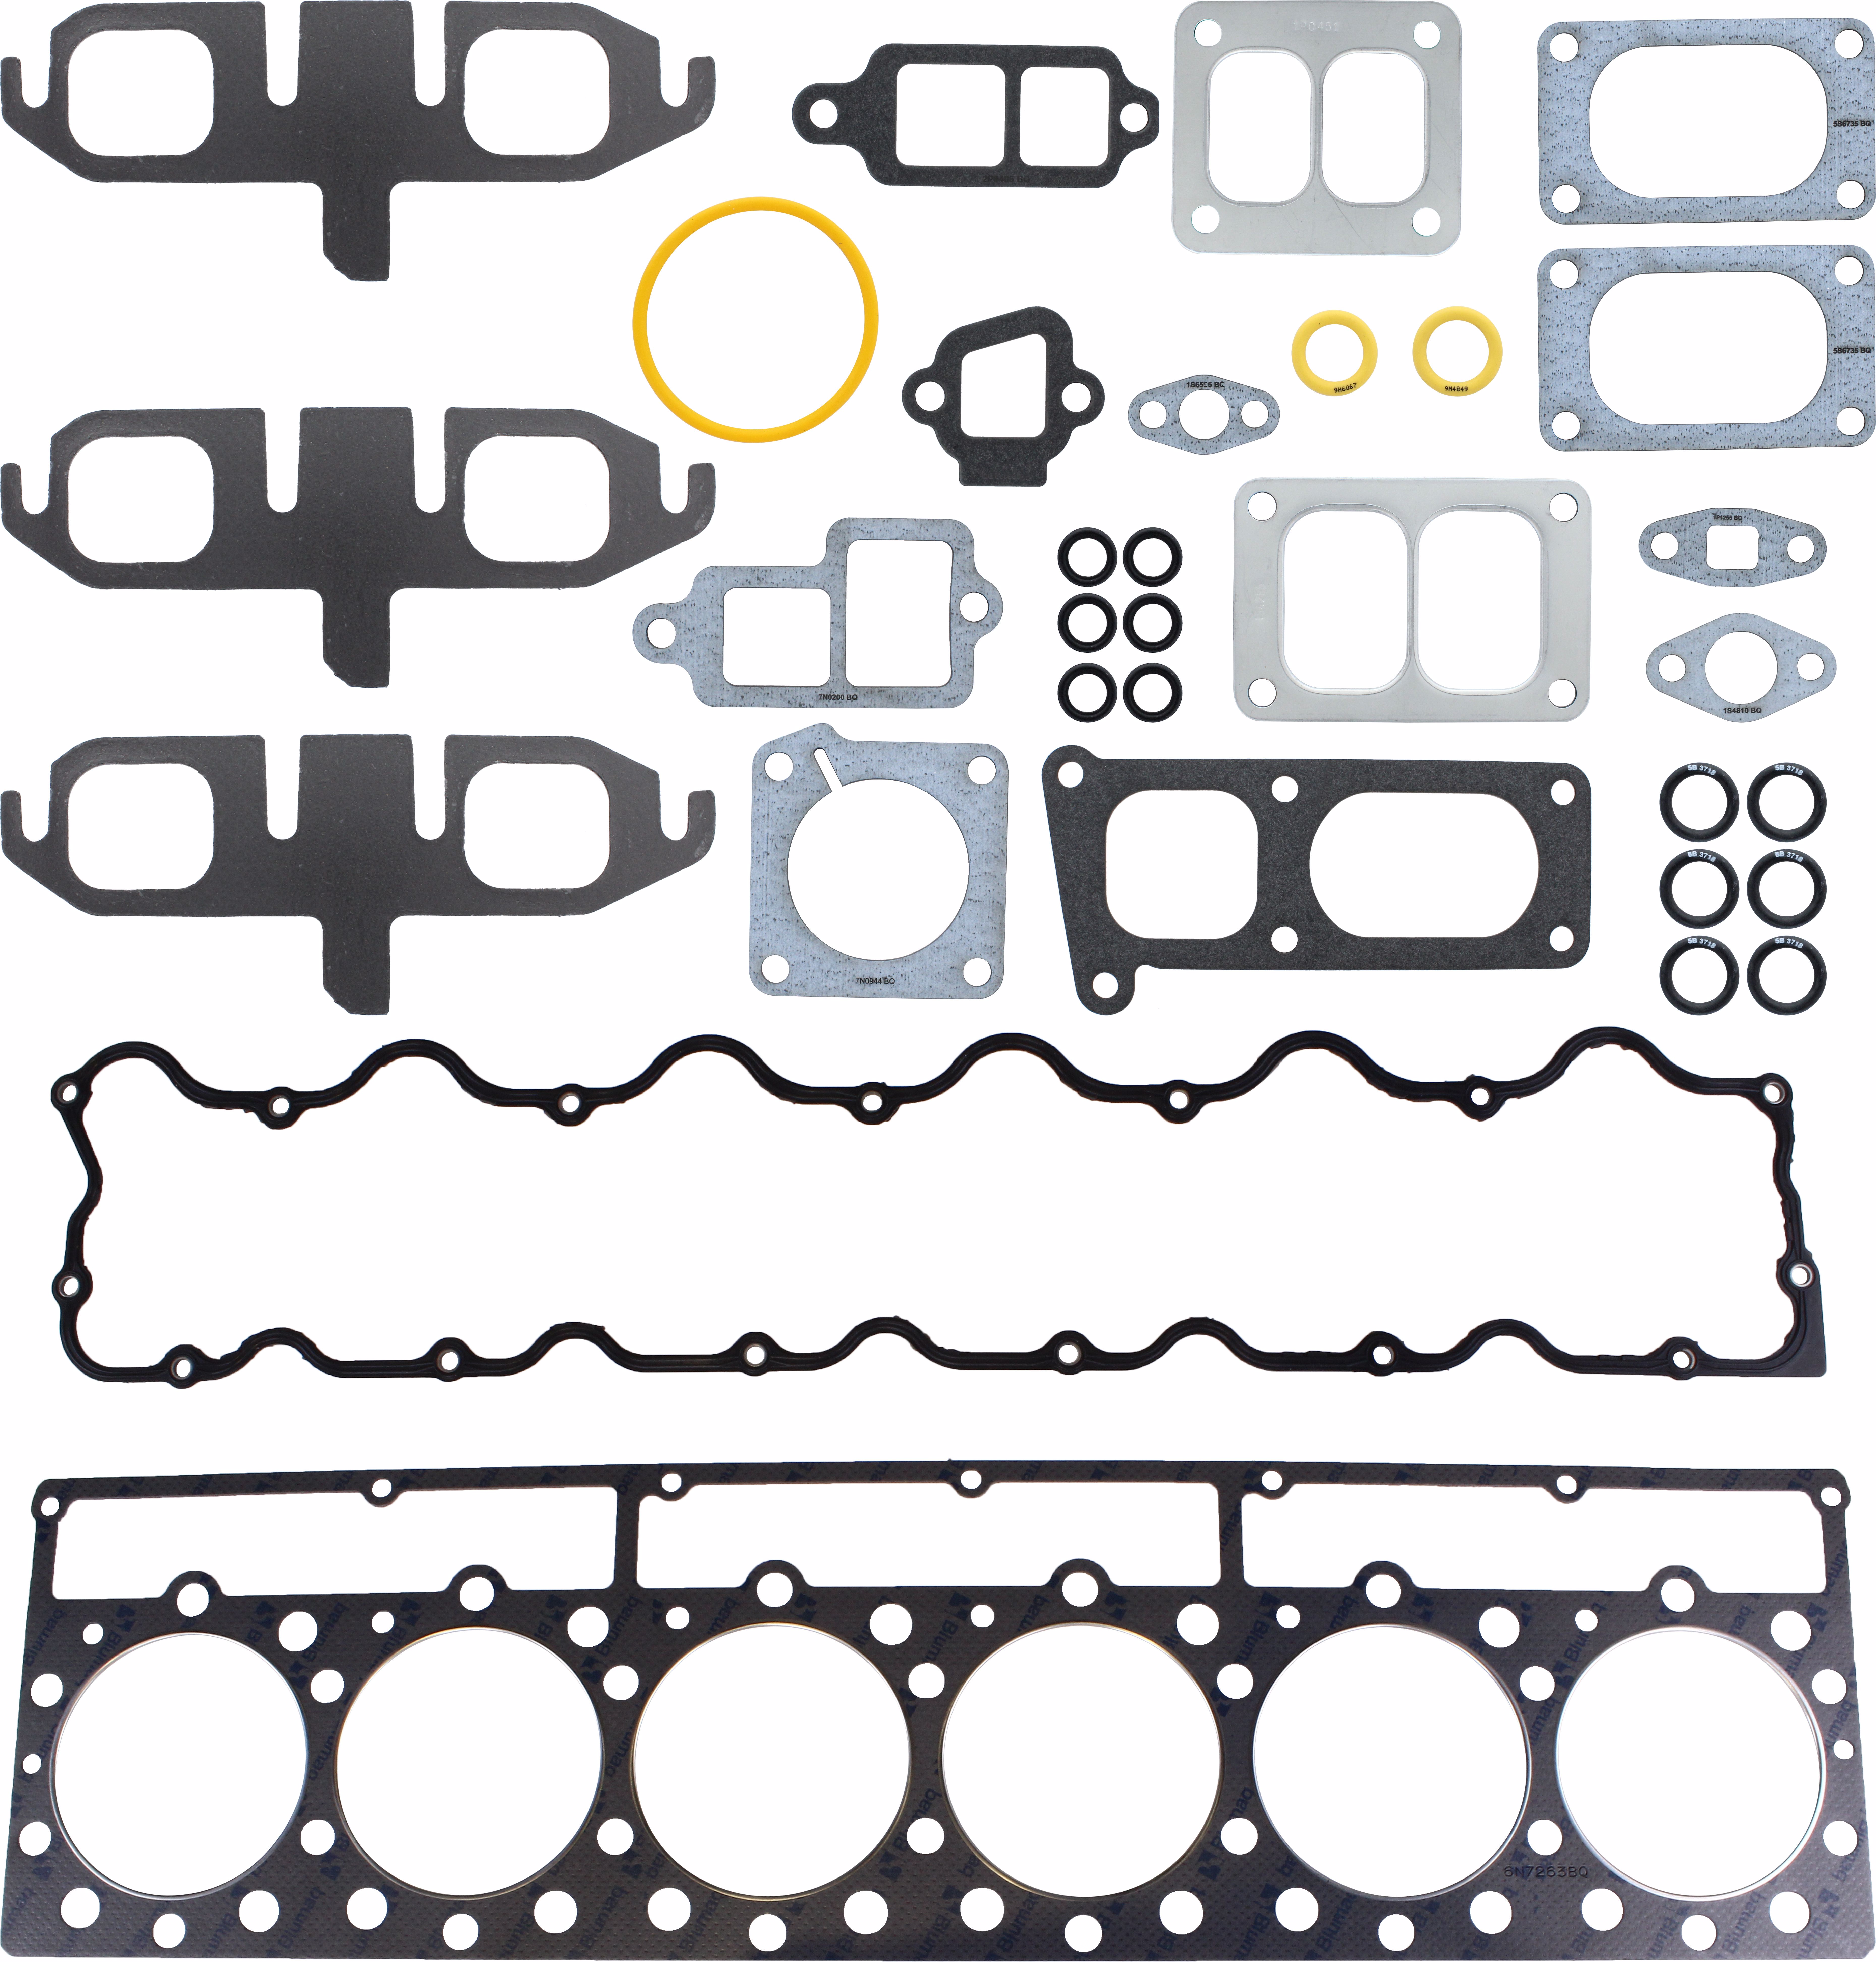 Details about   Caterpillar 5P-9243 Gasket Kit New Factory Packing 